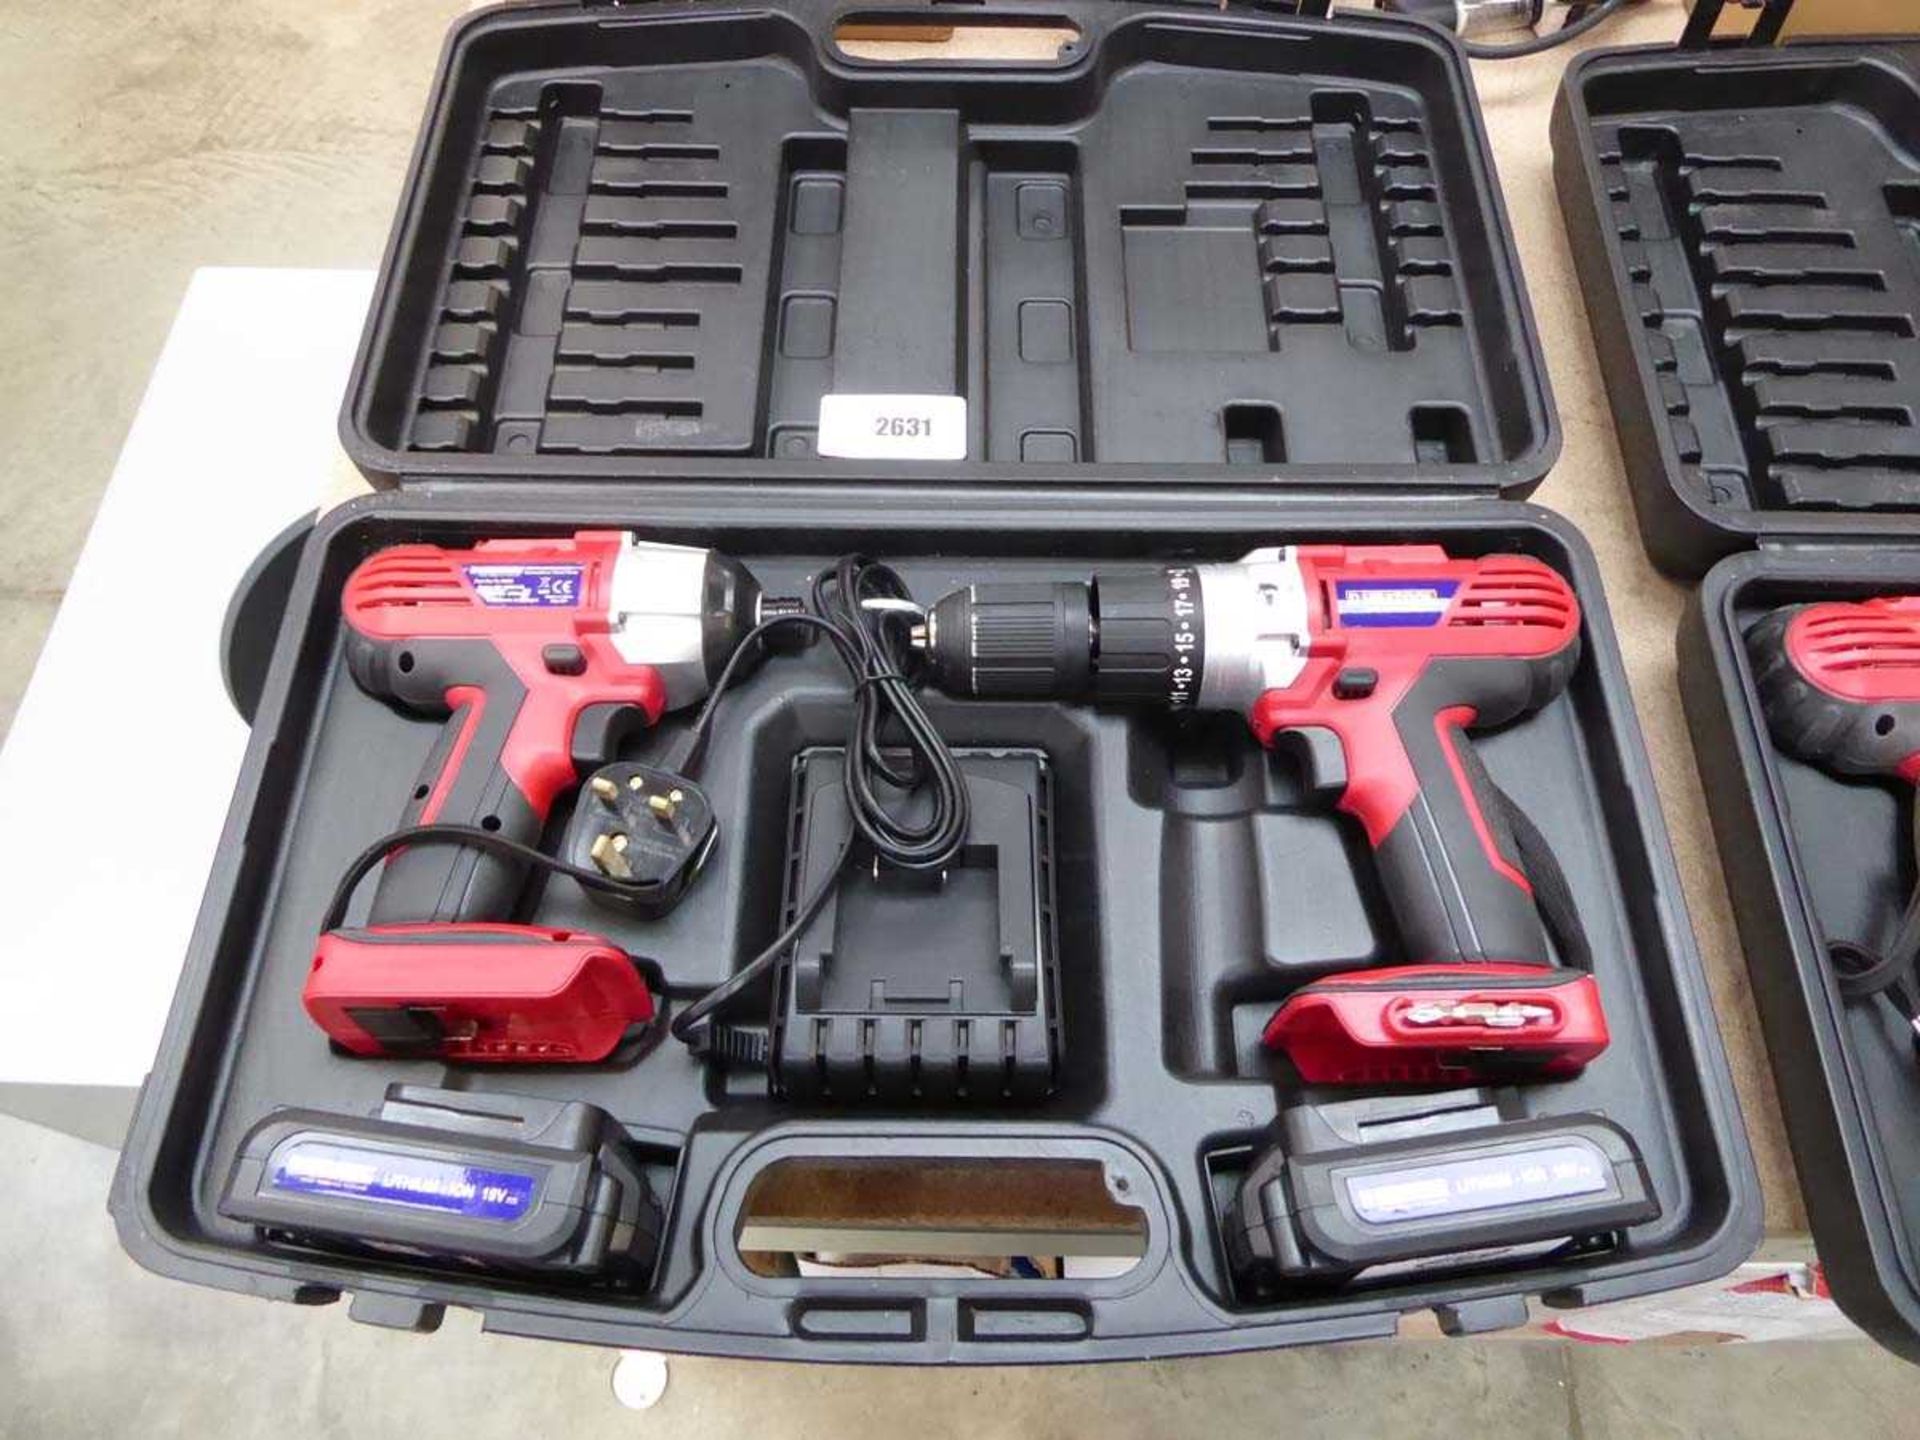 +VAT Cased Duratool cordless impact driver and screwdriver with 2 batteries and charger